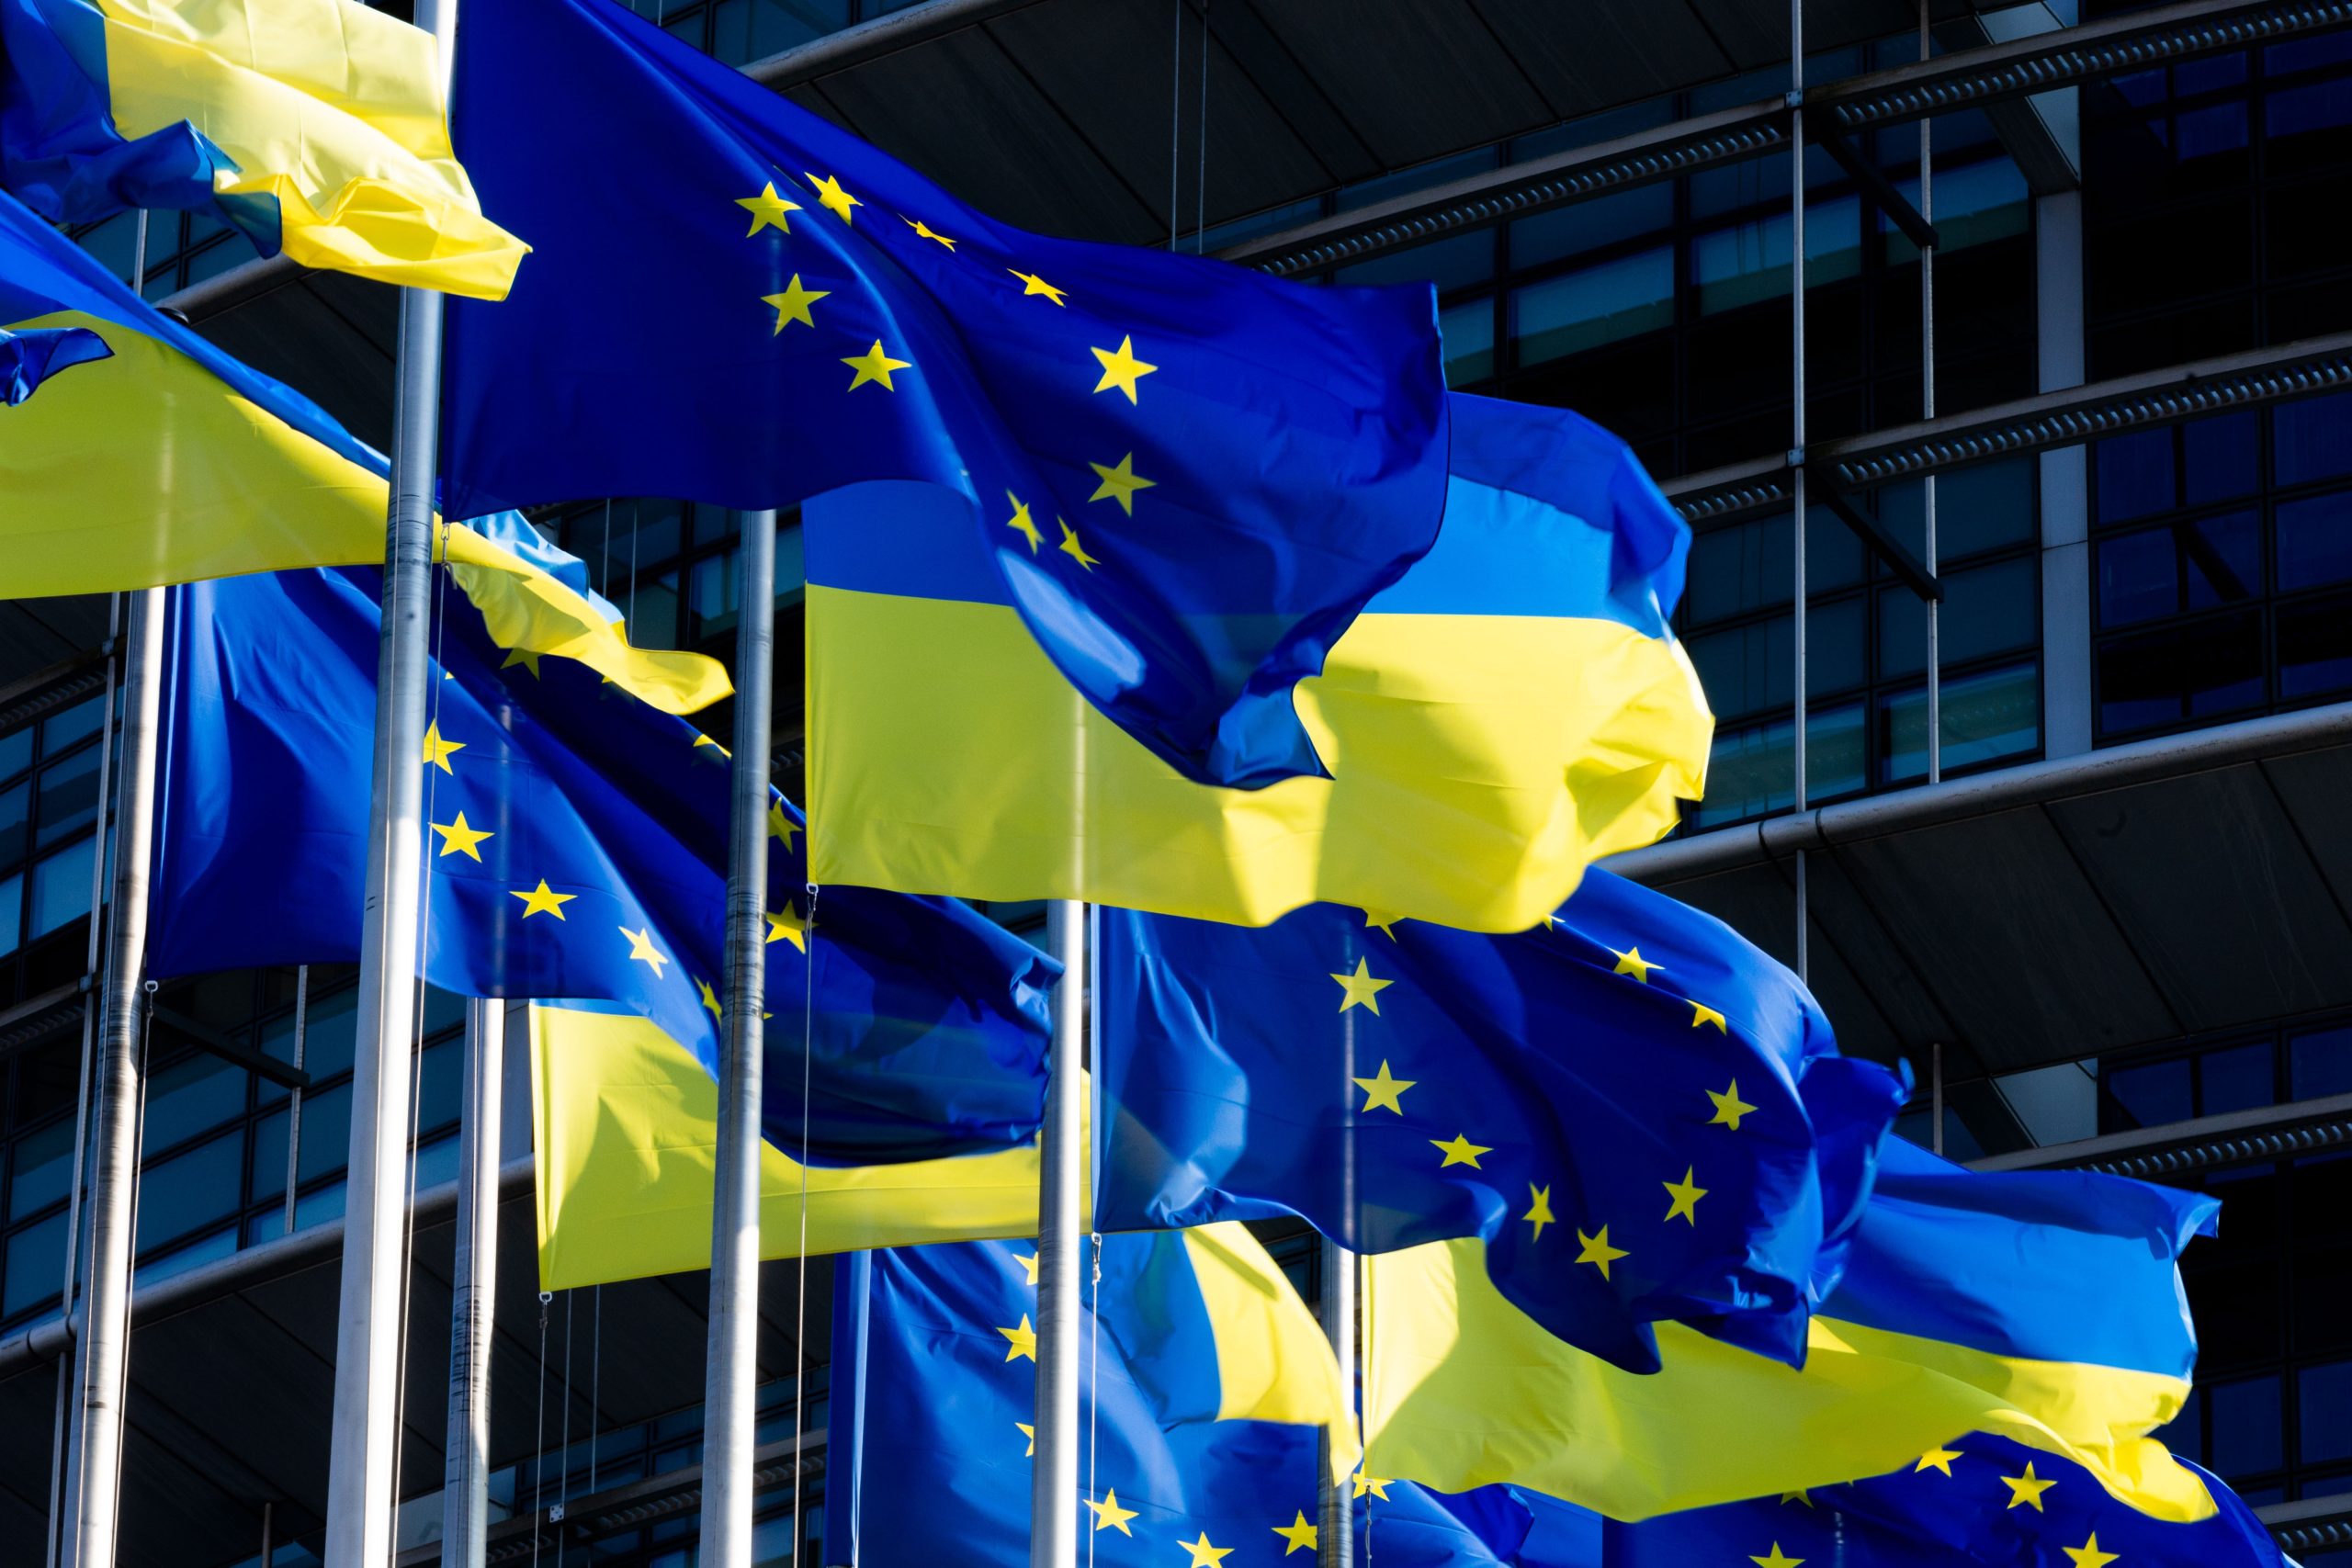 Ukrainian Flag is raised at the EP building in Strasbourg